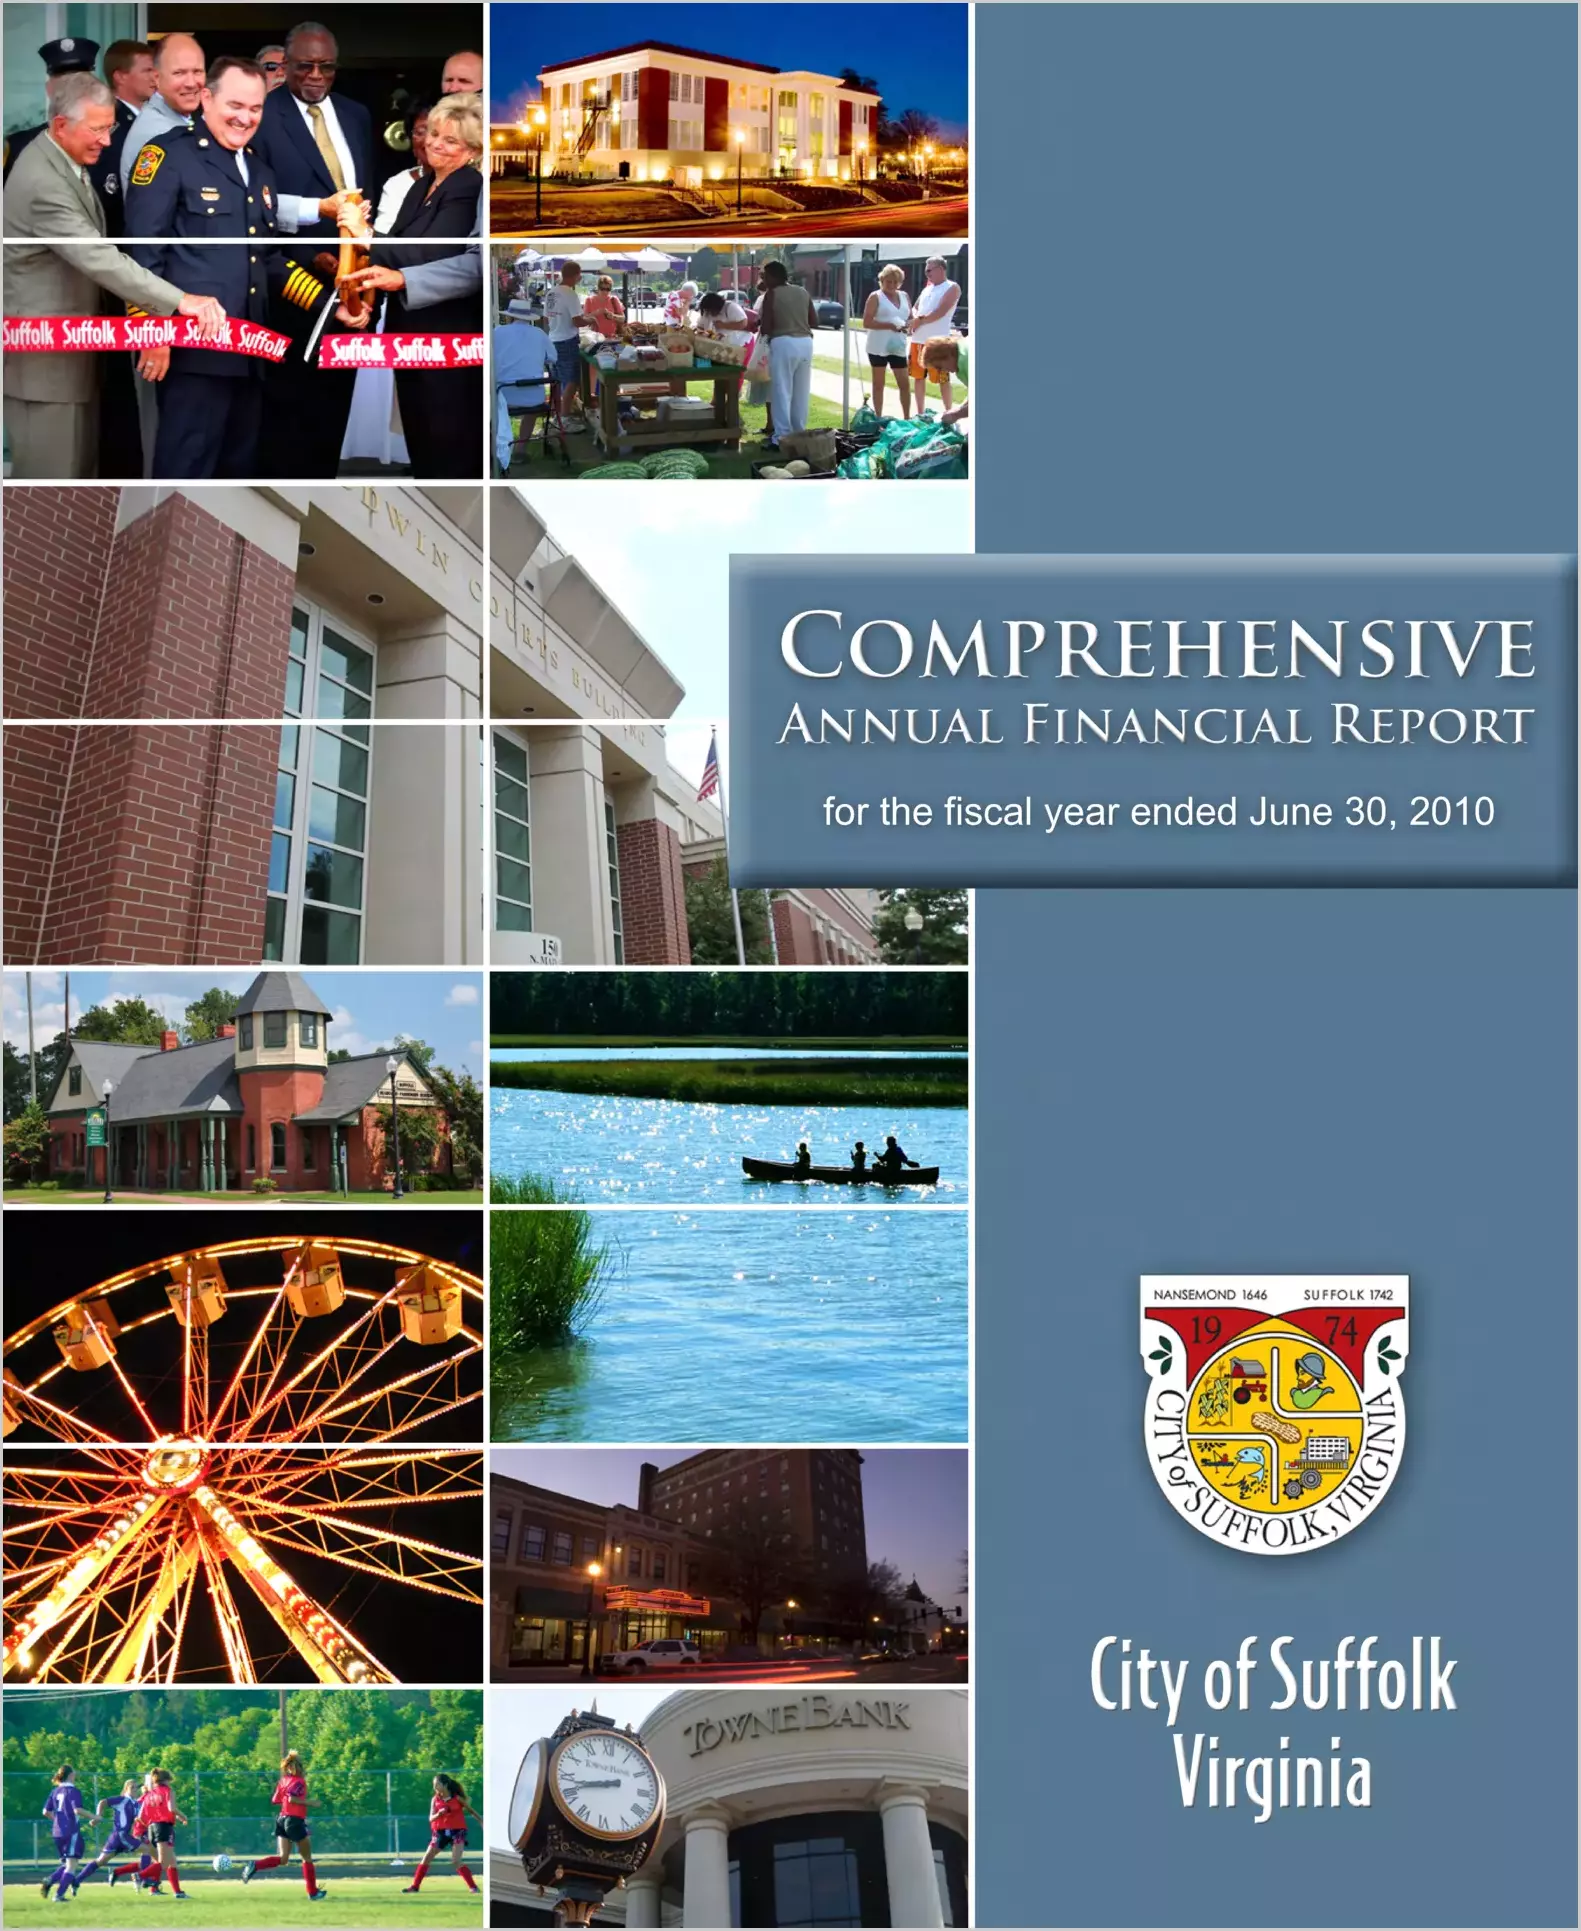 2010 Annual Financial Report for City of Suffolk